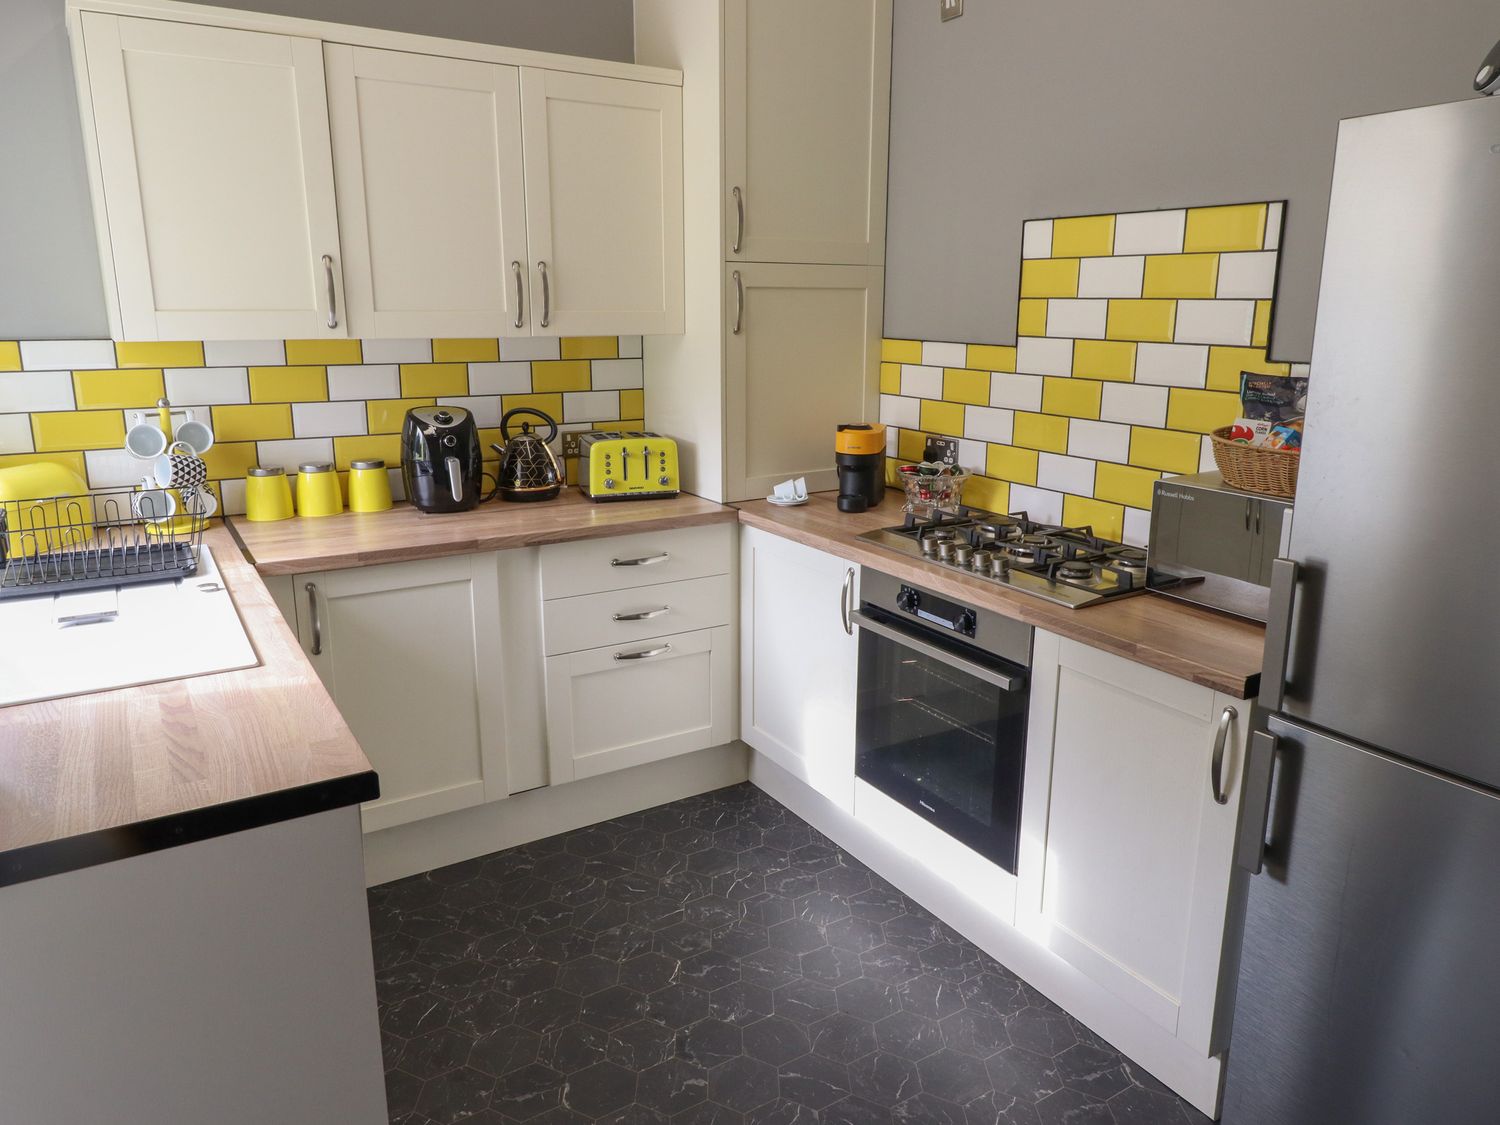 The Yellow House, Withernsea, East Yorkshire. Garden with hot tub and barbecue. Two pets, 4 bedrooms